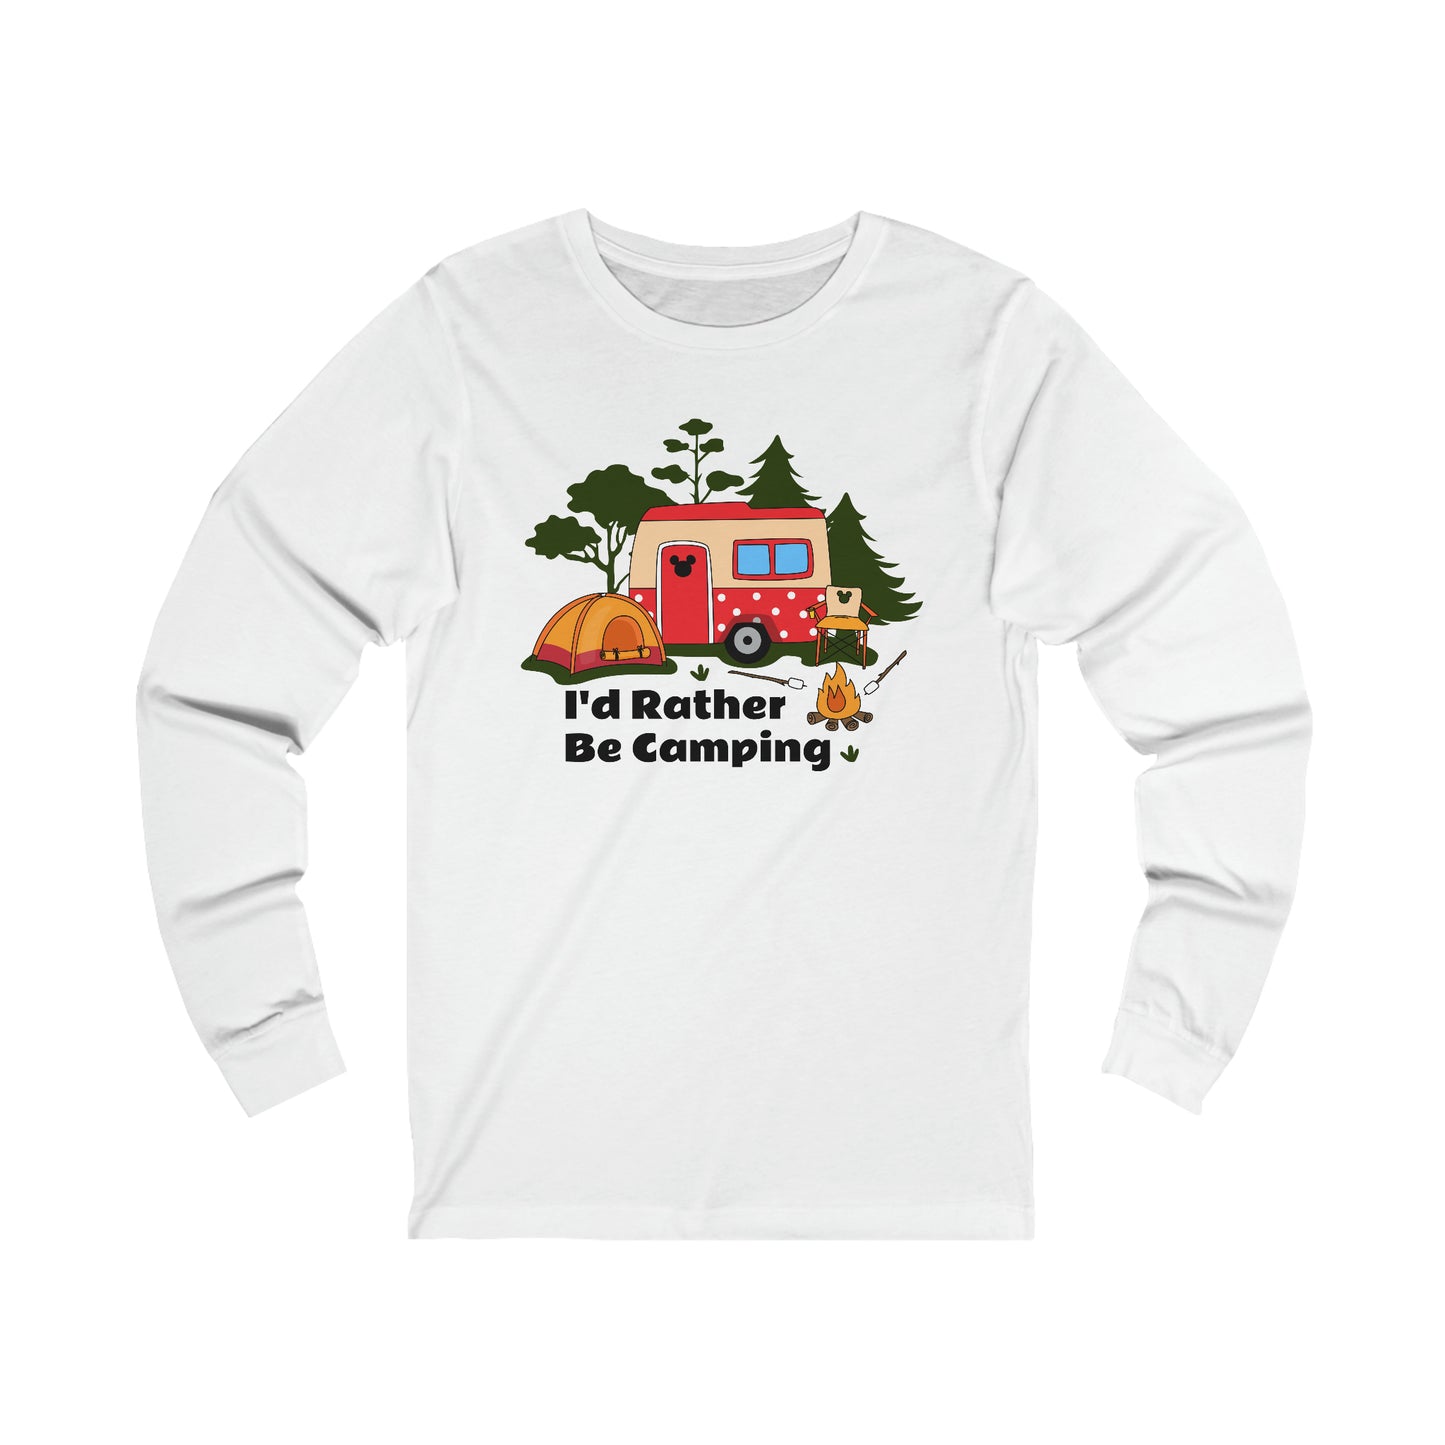 I'd Rather Be Camping Unisex Long Sleeve Graphic Tee